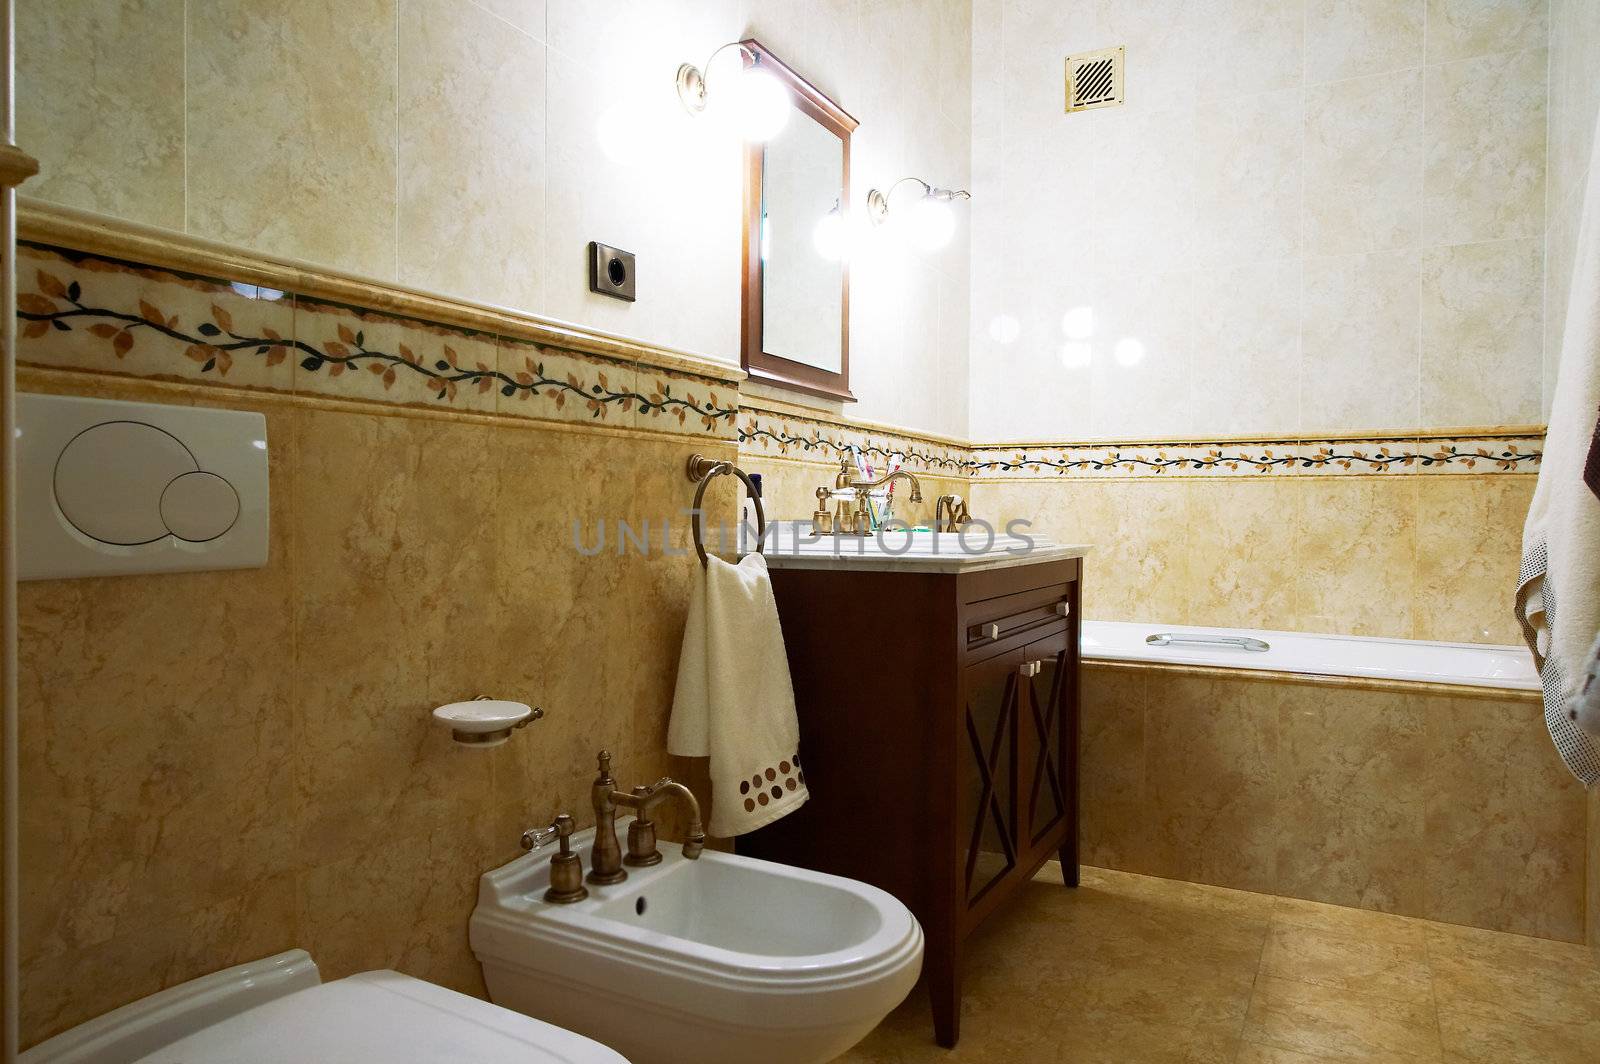 bathroom in old style by terex